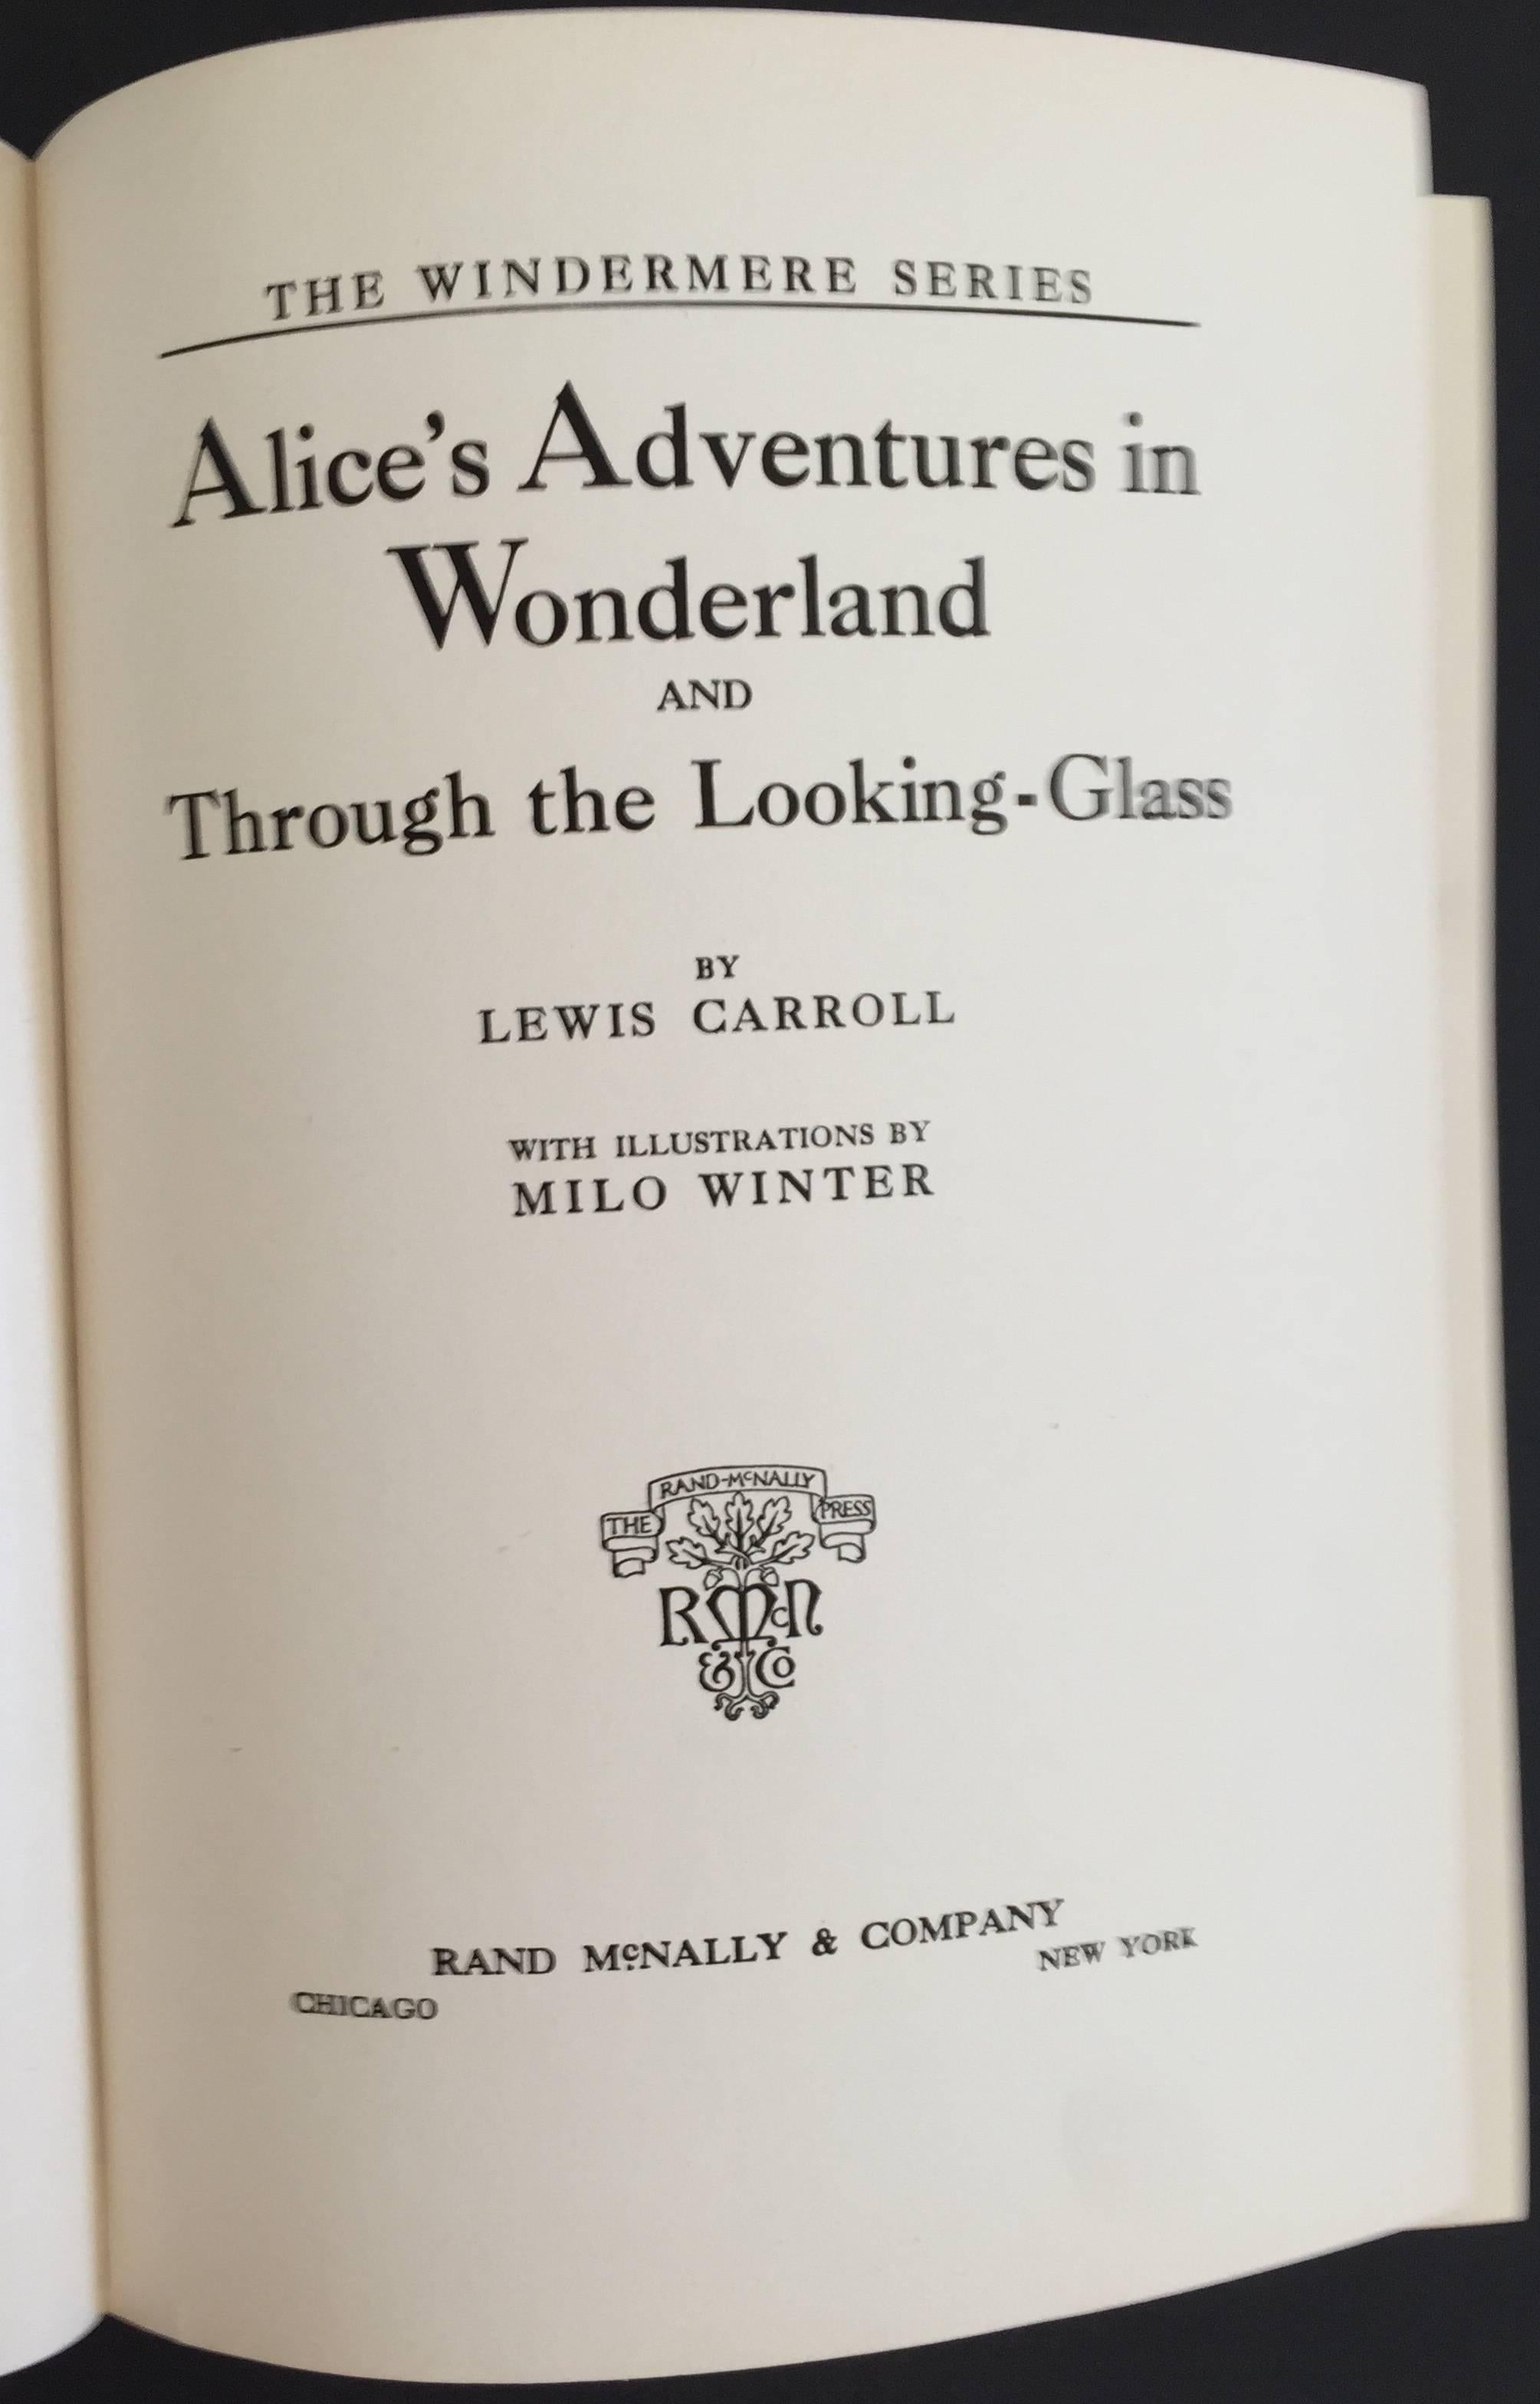 This is Alice’s Adventures in Wonderland and Through the Looking-Glass presented together with illustrations by Milo Winter.

This is the first edition of the 1916 Windemere Edition published by the Rand McNally Co. and illustrated by artist Milo